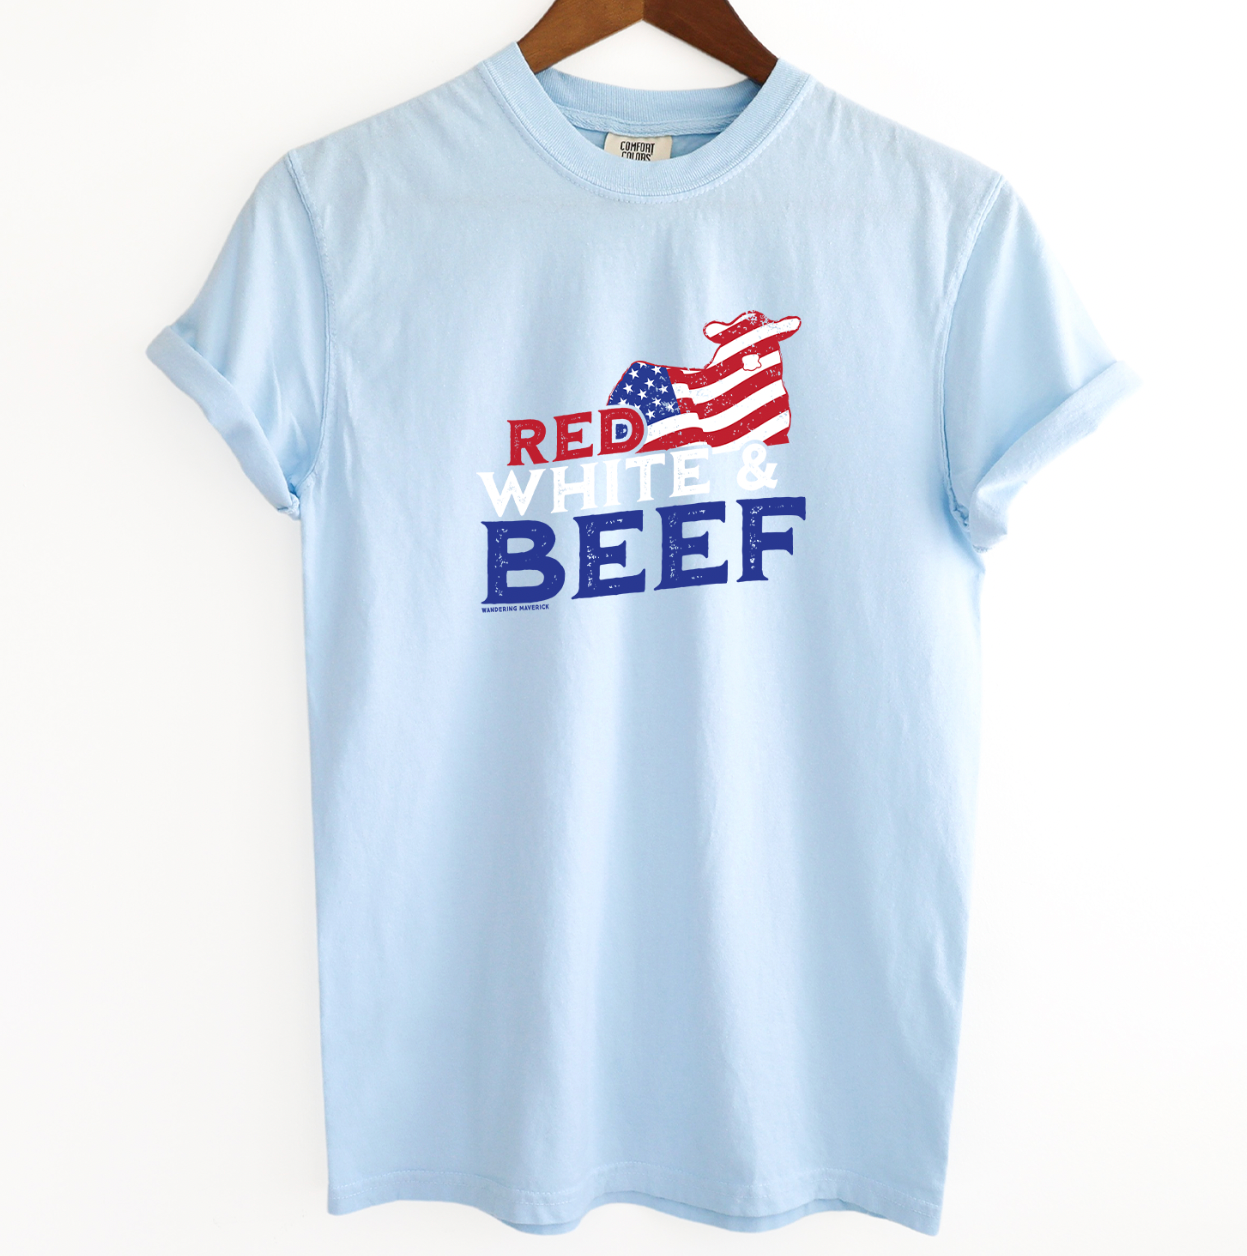 Red White and Beef ComfortWash/ComfortColor T-Shirt (S-4XL) - Multiple Colors!